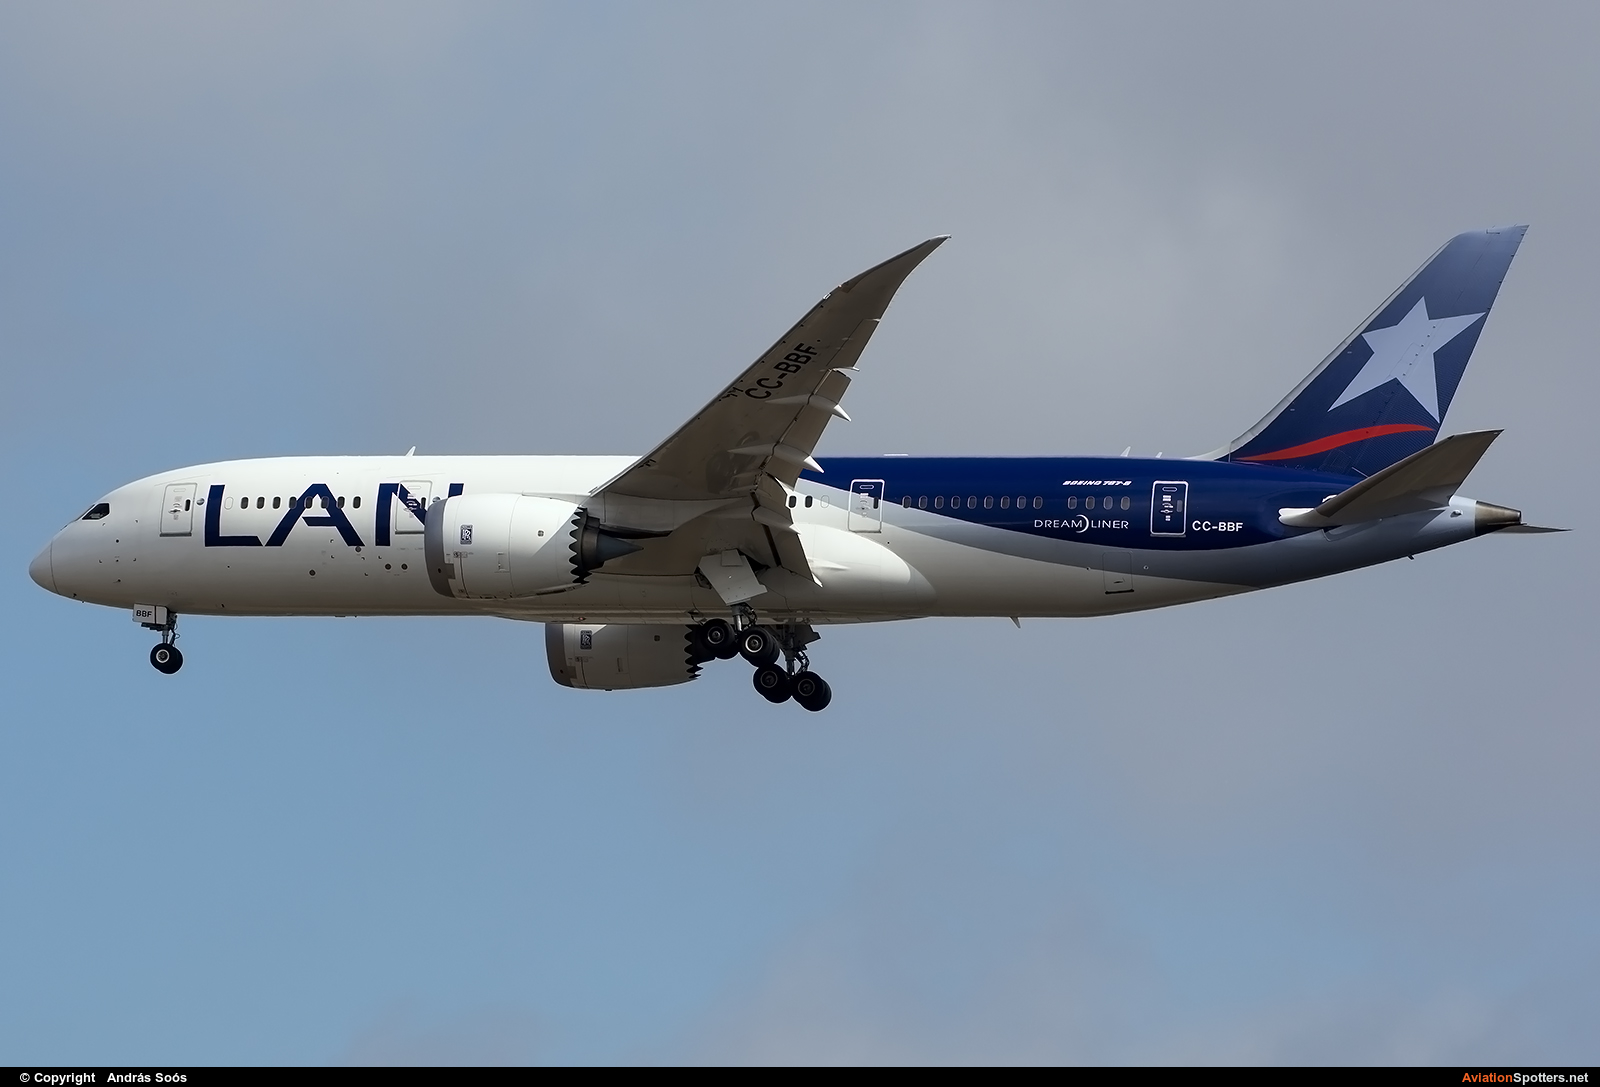 LAN Airlines  -  787-8 Dreamliner  (CC-BBF) By András Soós (sas1965)